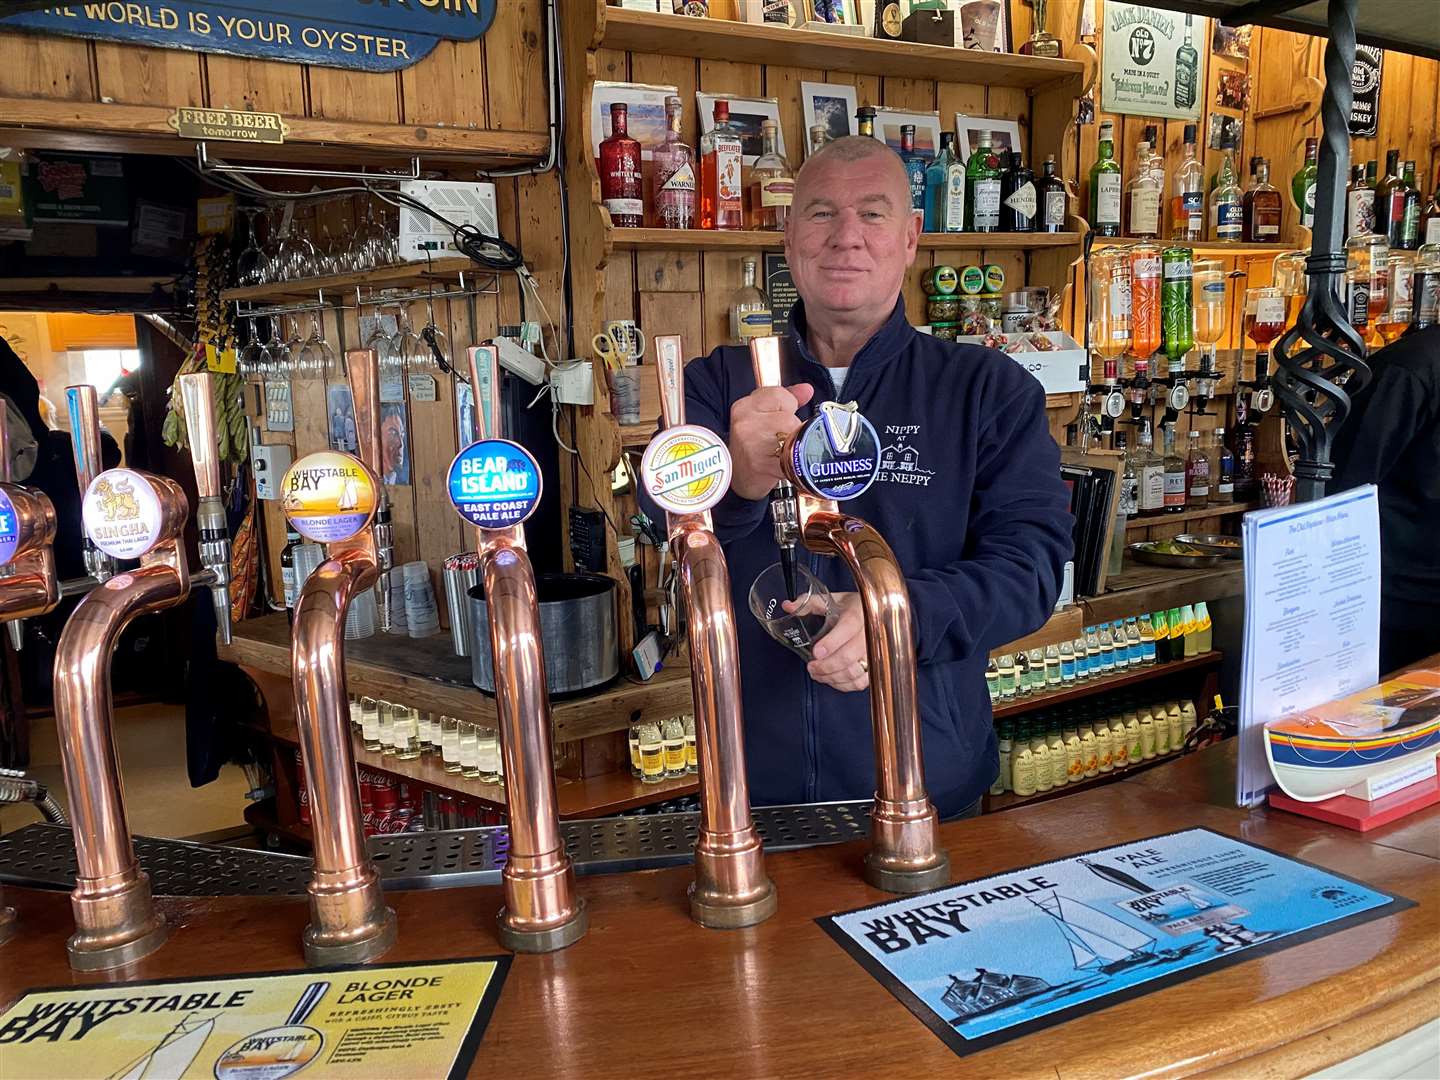 Darren Wilton will celebrate 20 years as landlord of the Old Neptune in Whitstable this August